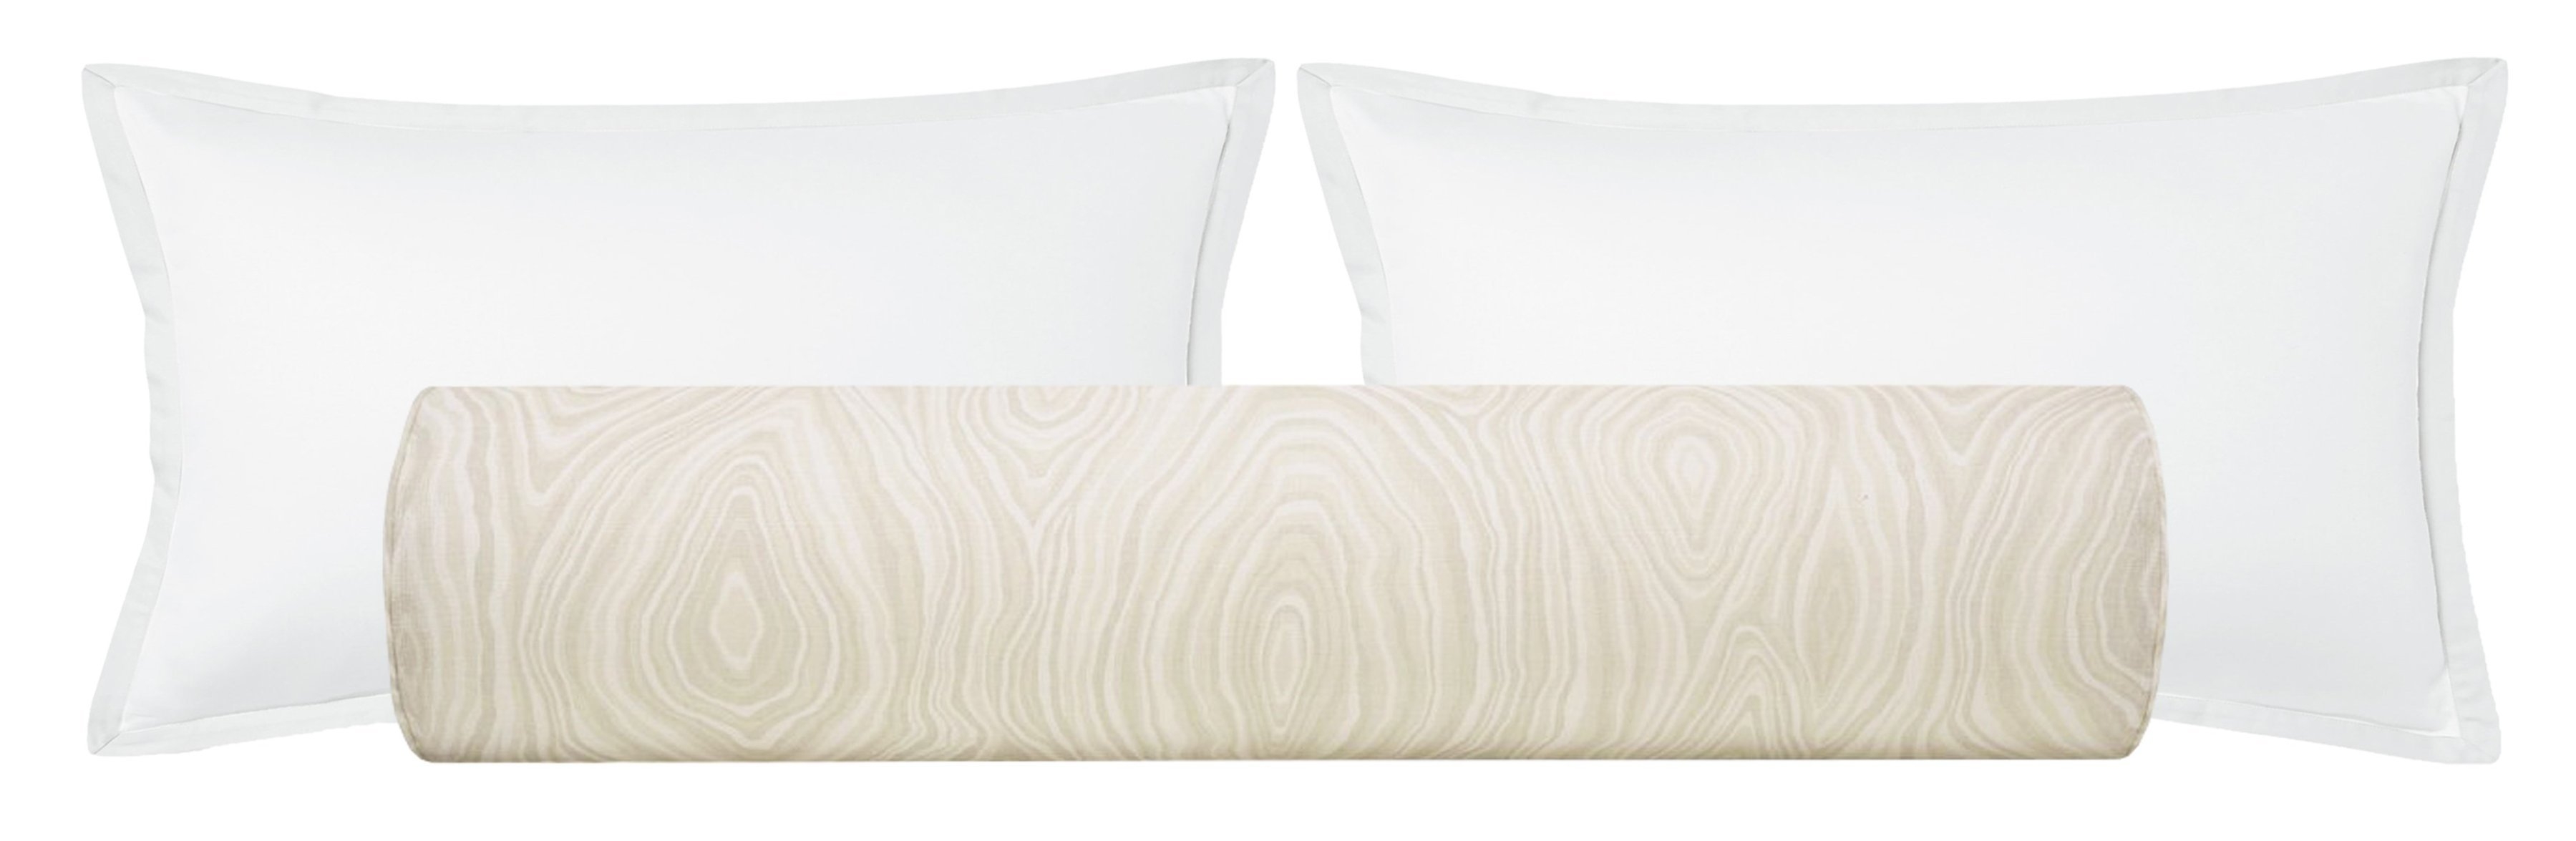 THE BOLSTER :: AGATE LINEN PRINT // NATURAL - QUEEN // 9" X 36" - Image 0